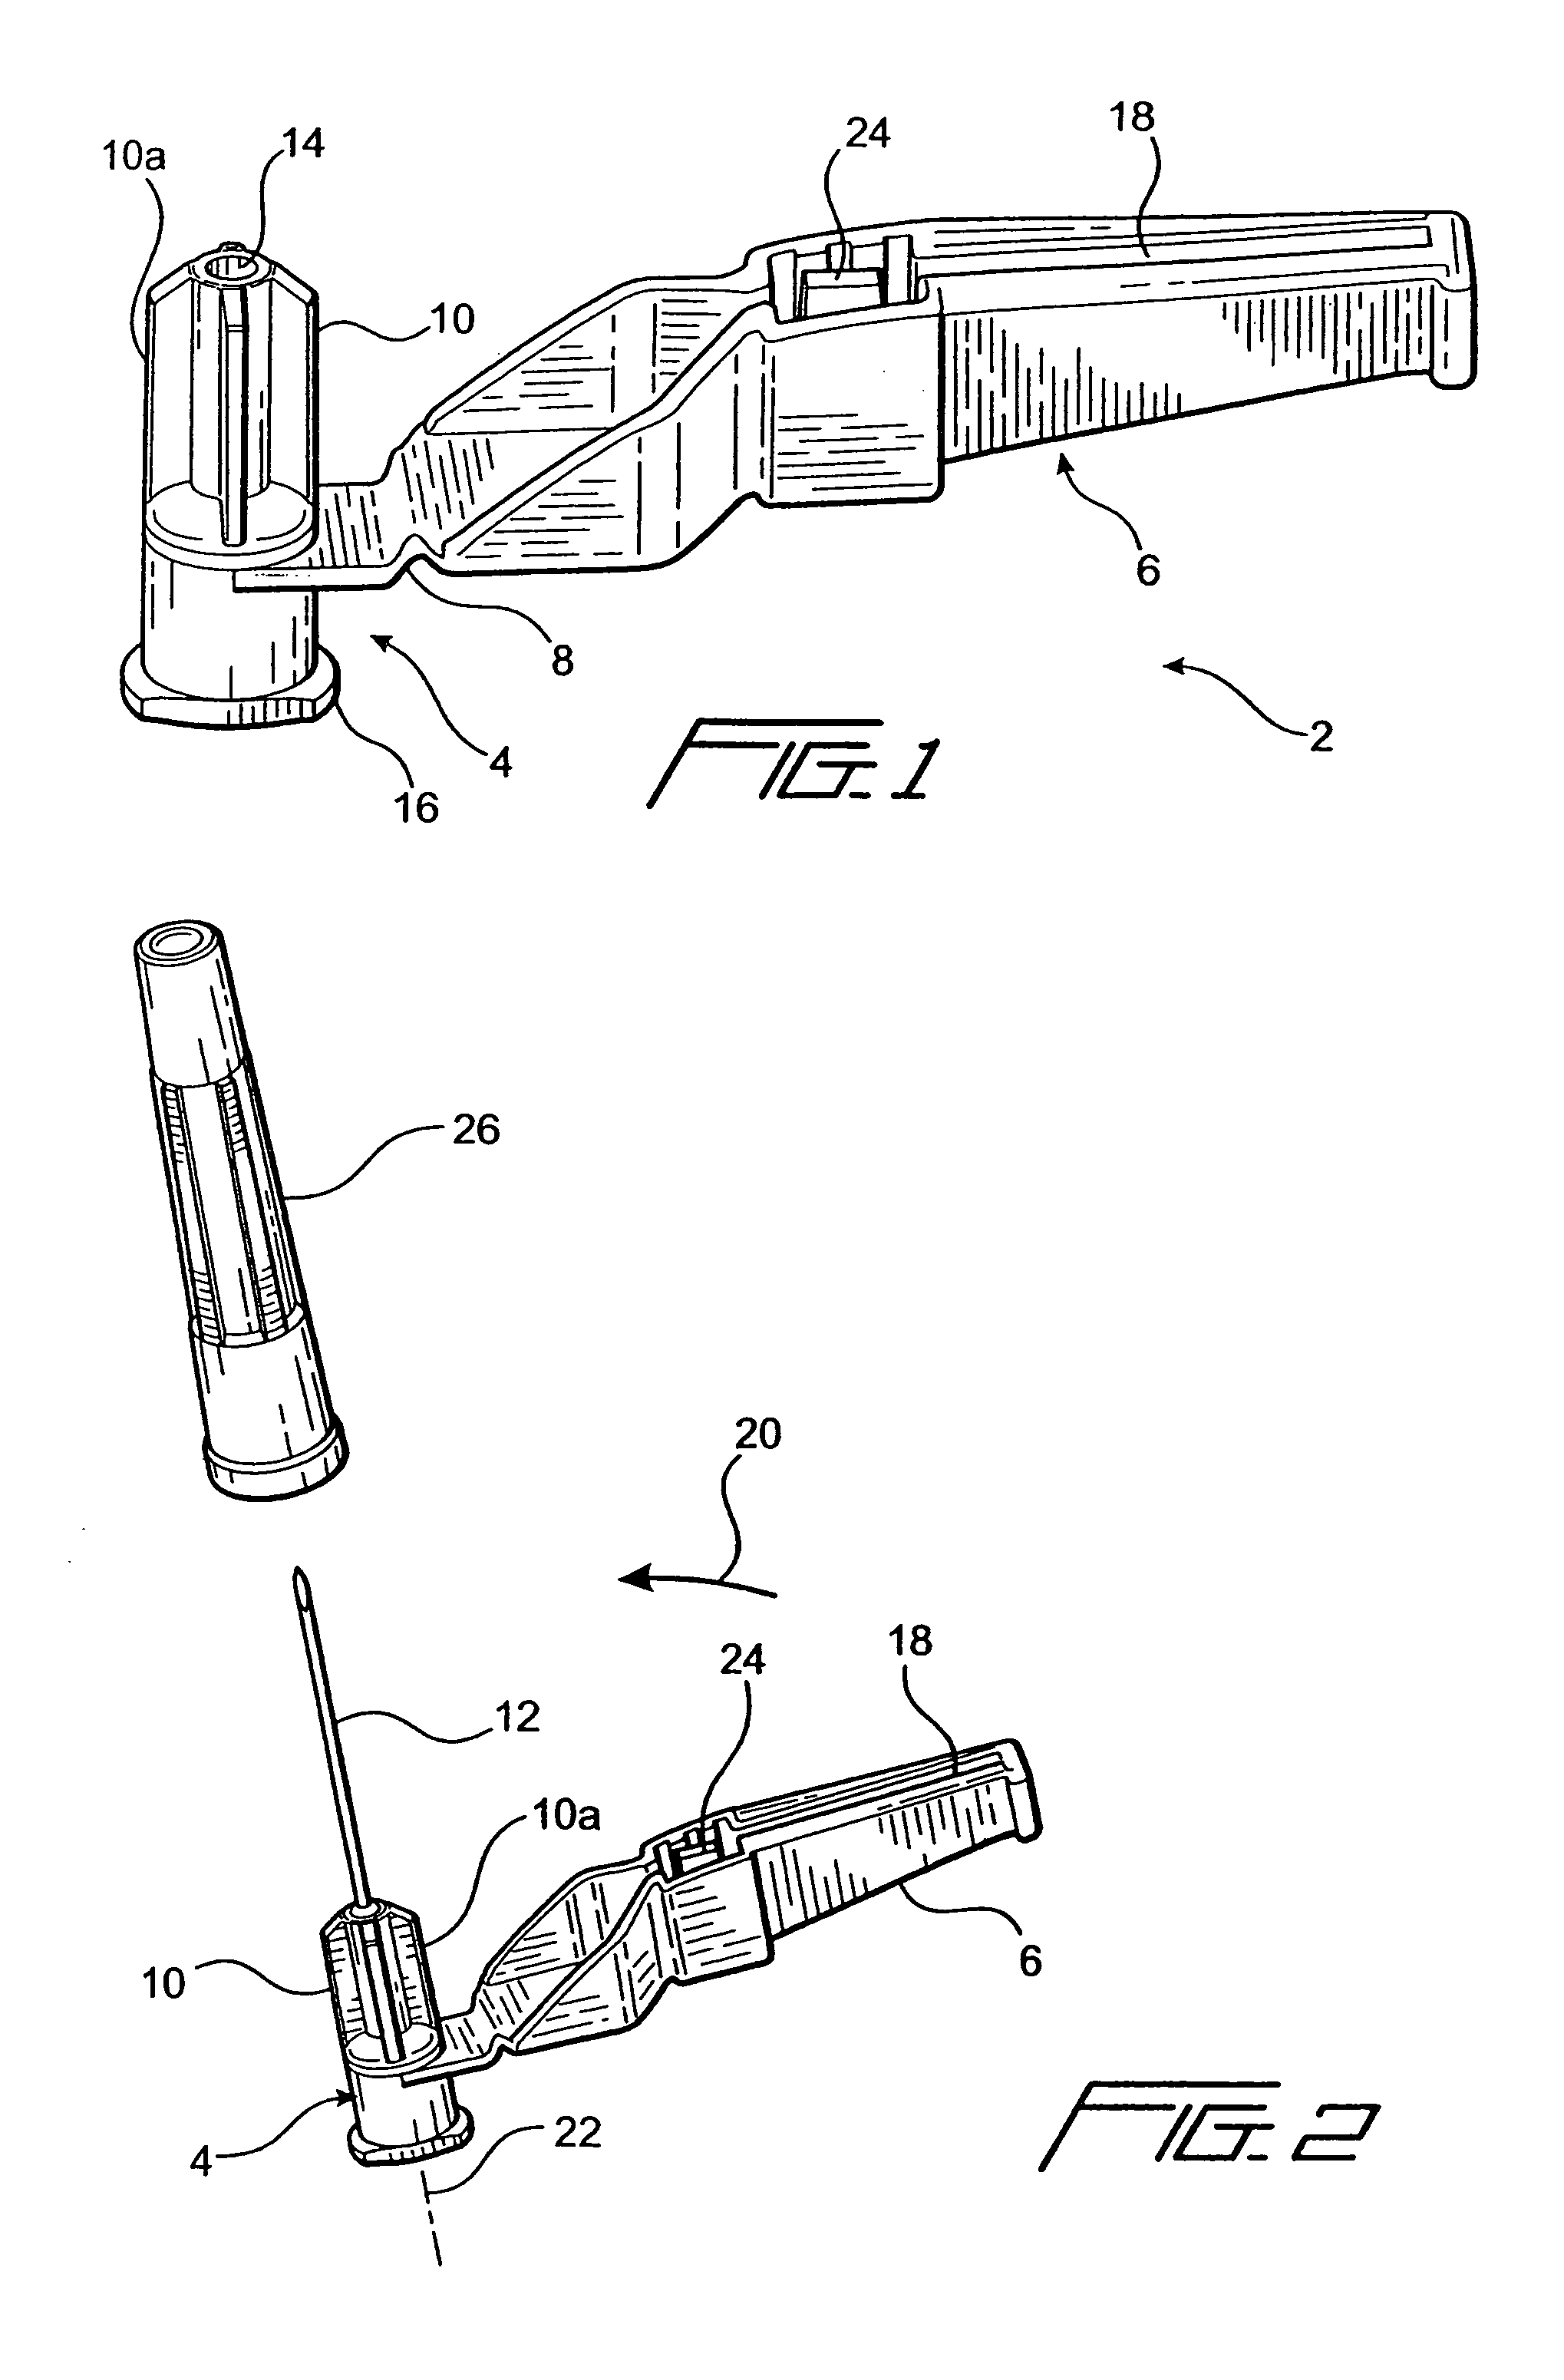 Needle protection device with gauge specific color coding and method for manufacturing thereof